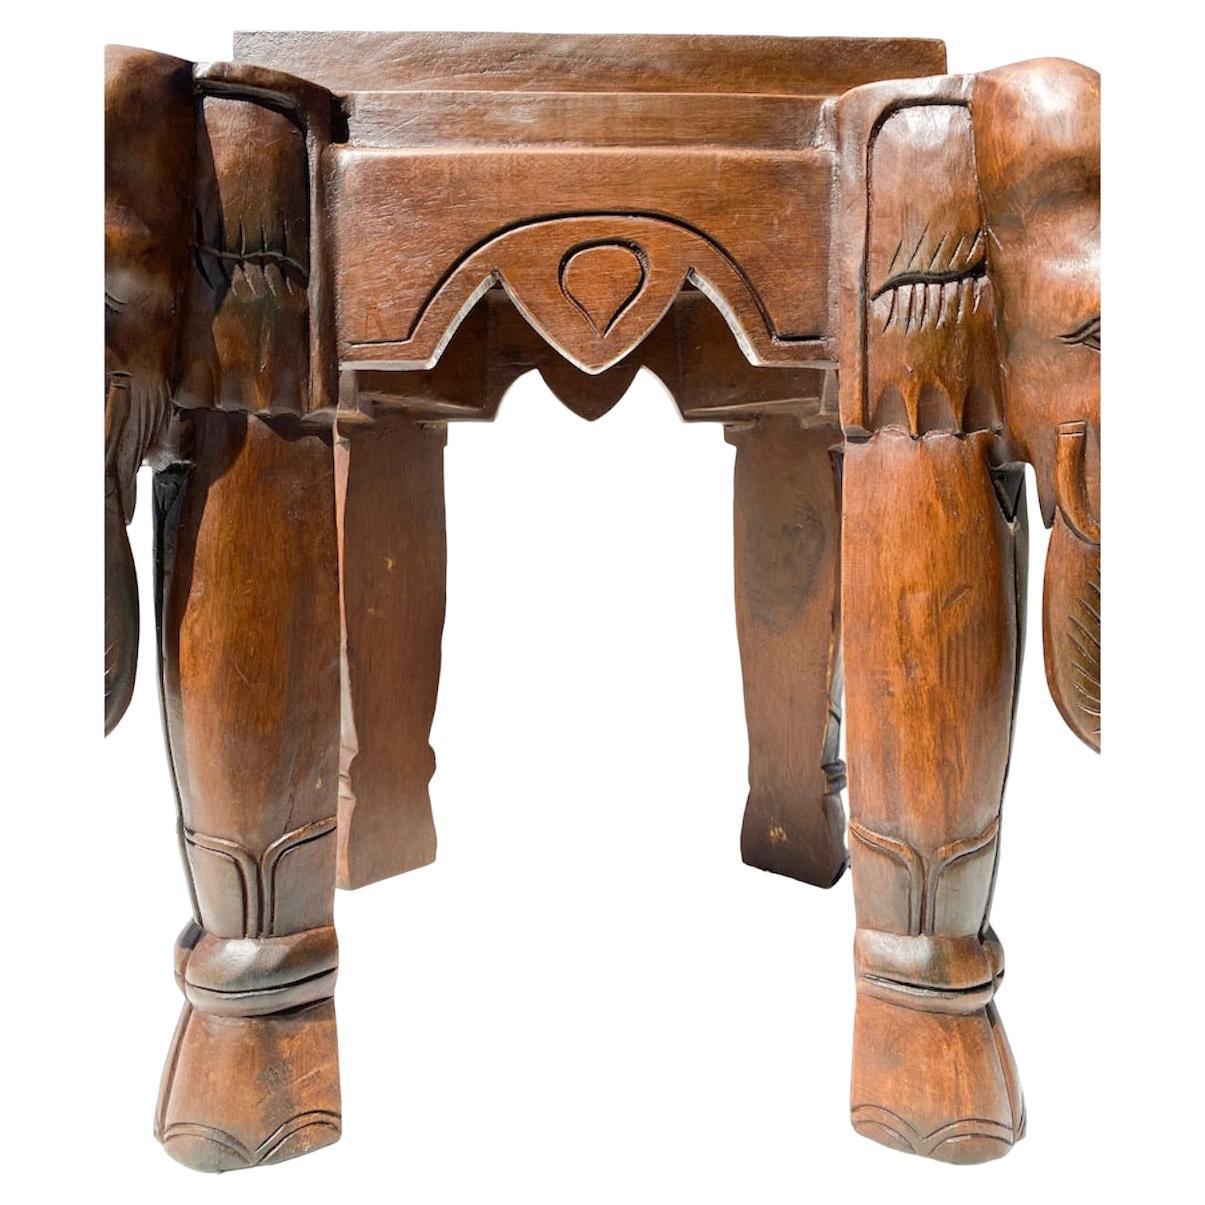 Carved Elephant side table , possible a foot stool or plants stand. This is solid and beautiful.